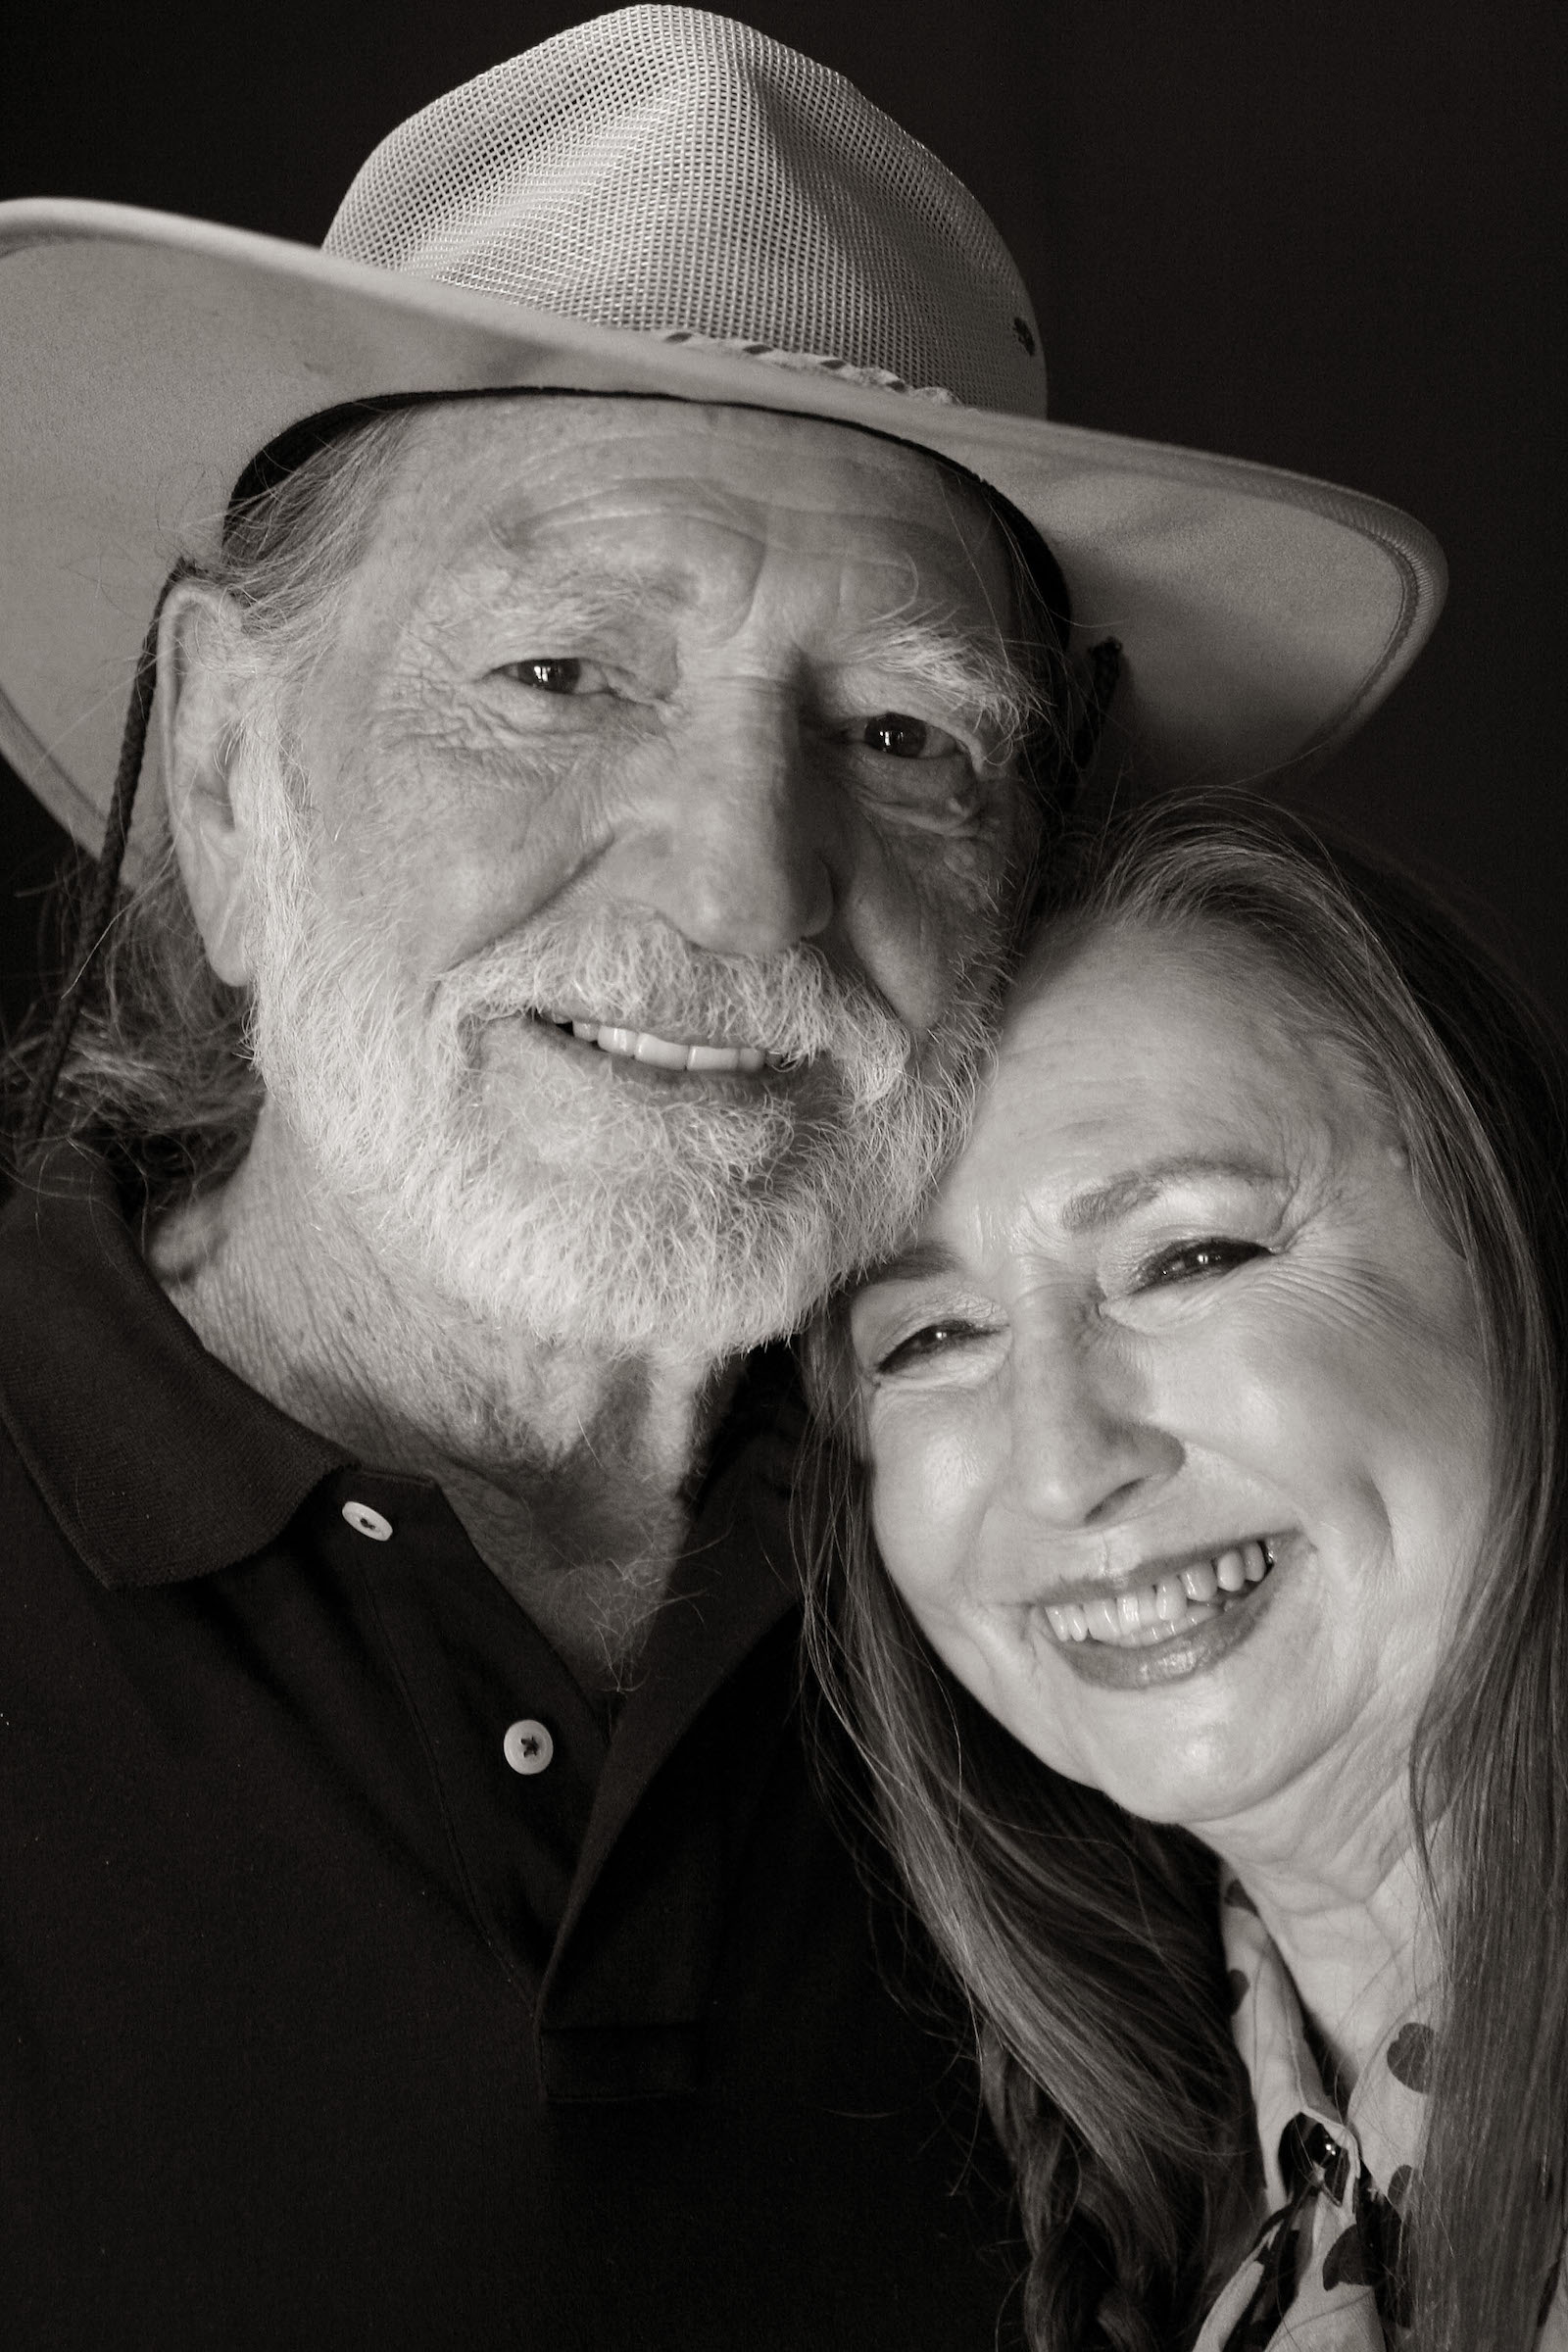 Willie Nelson, wearing a cowboy hat, stands next to his sister, Bobbie Nelson